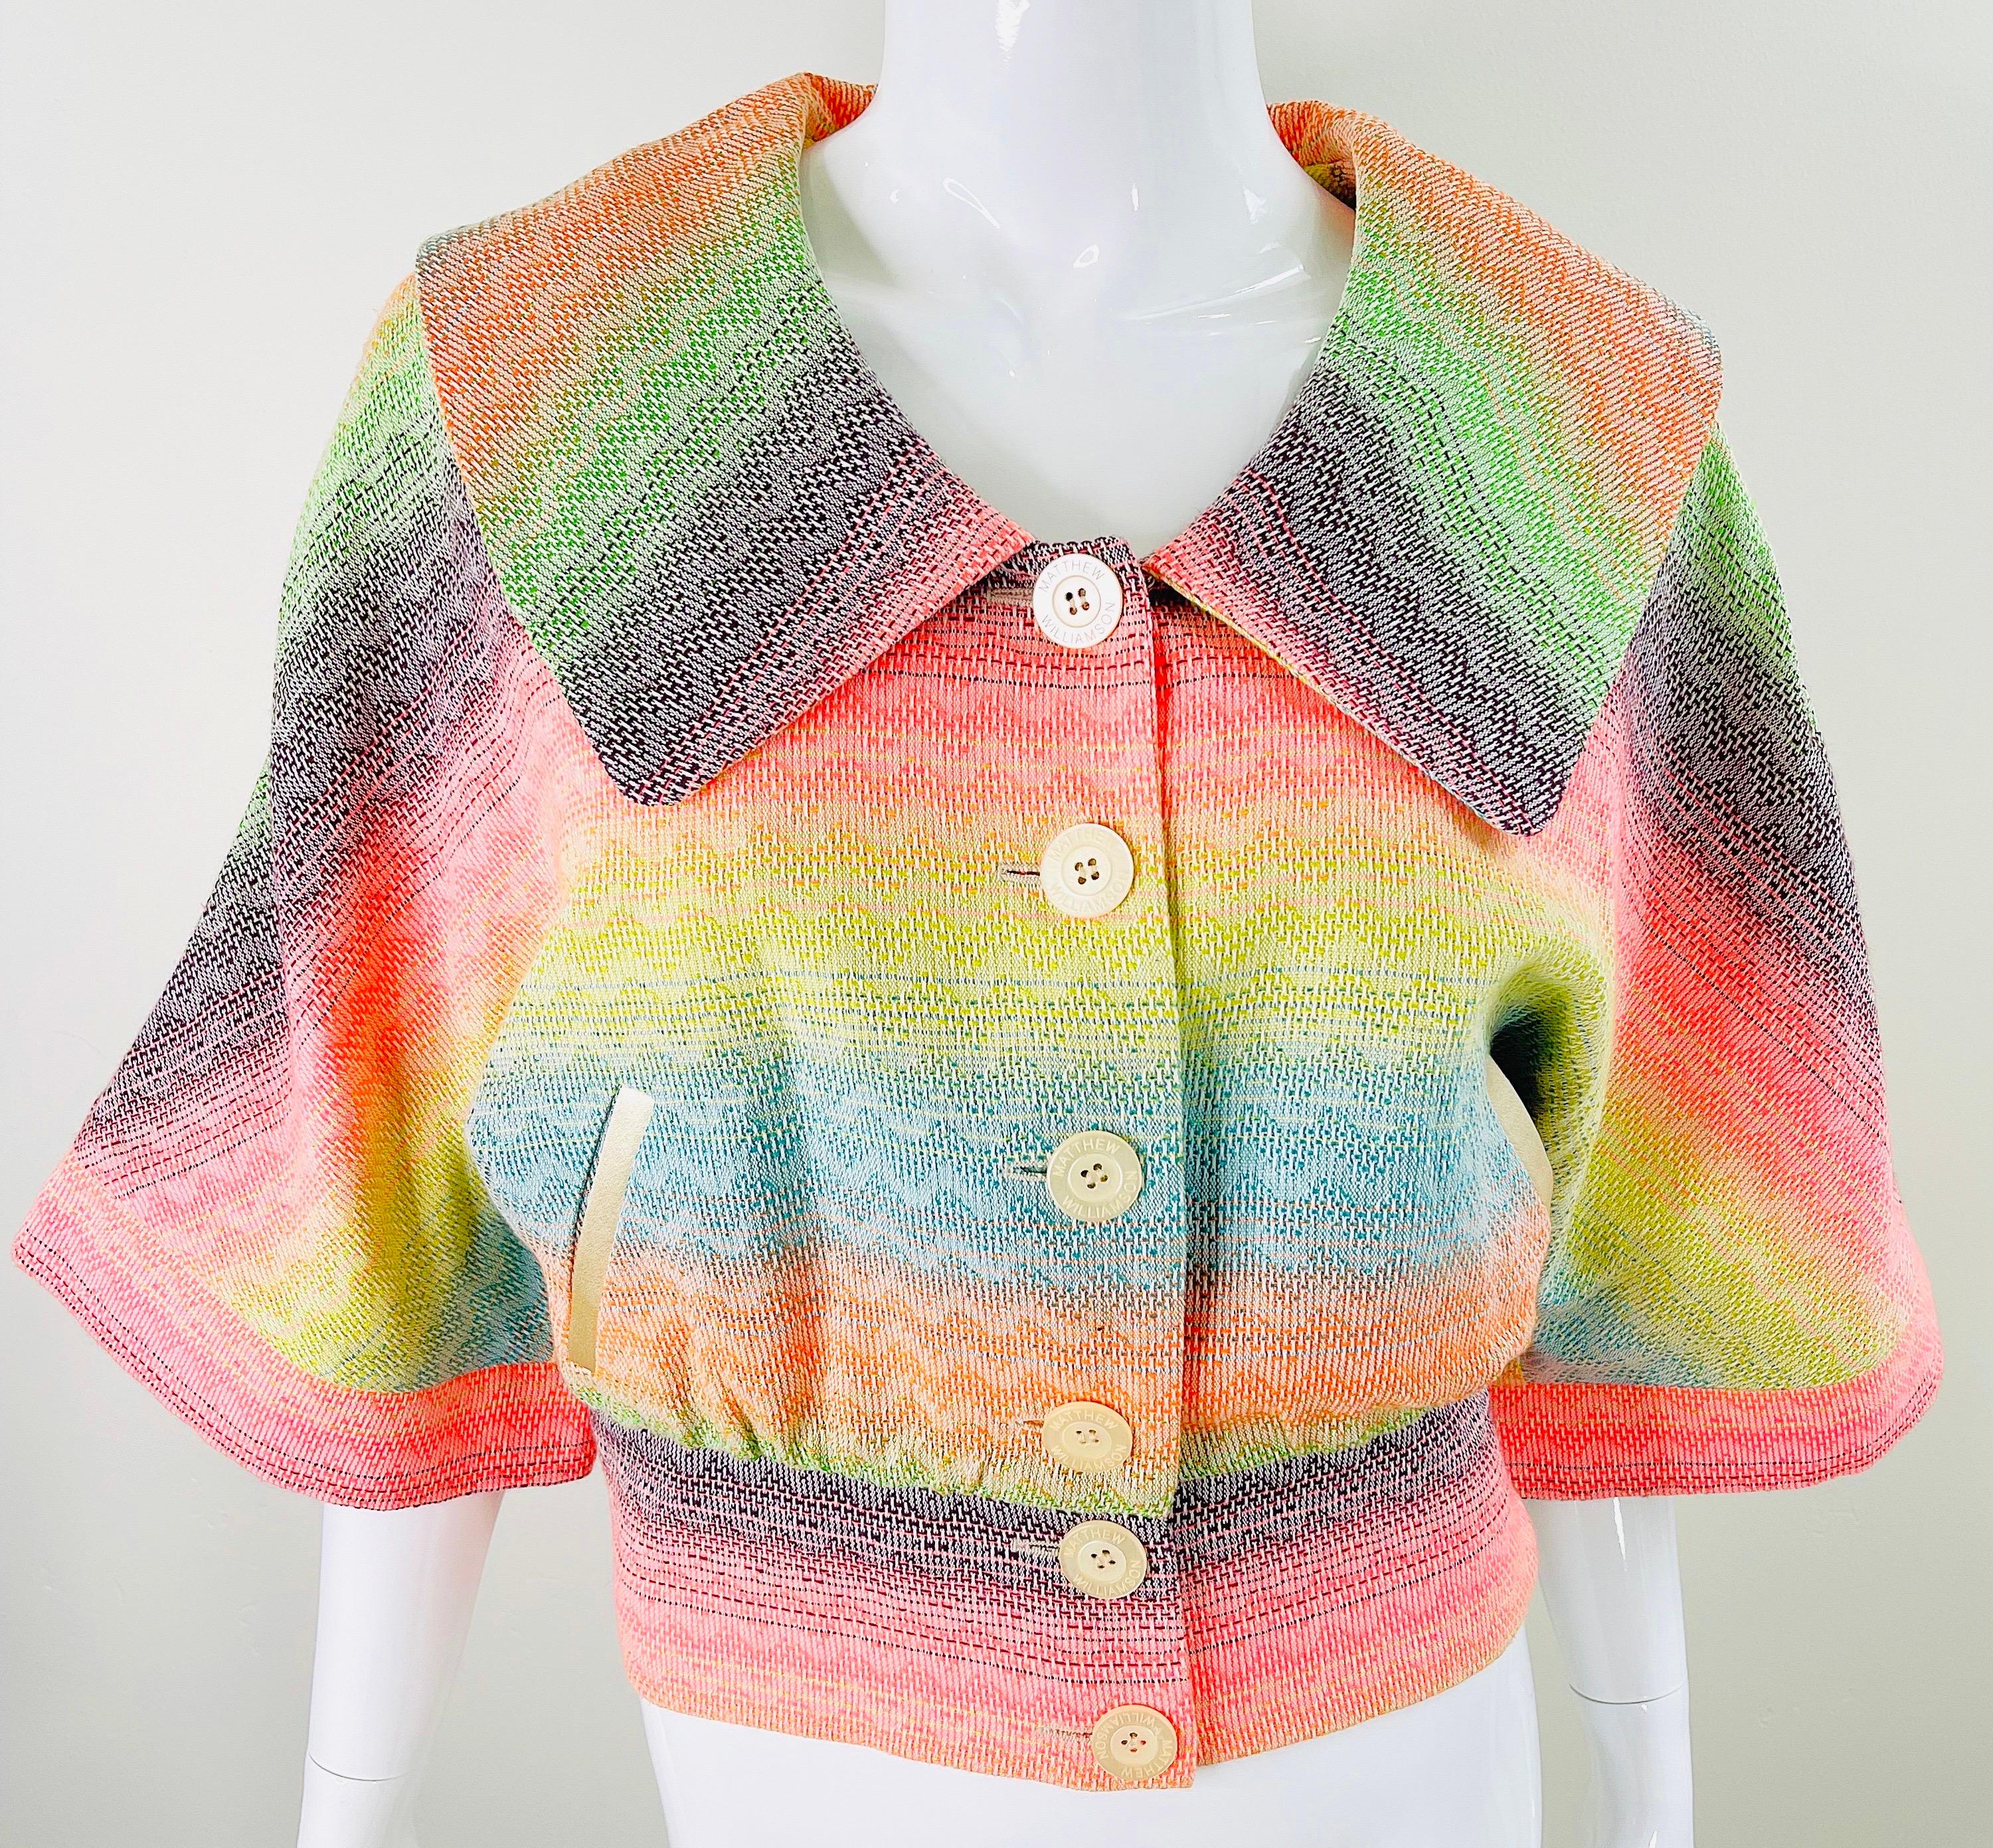 Matthew Williamson Spring 2002 Sz 8 Colorful Rainbow Striped 3/4 Sleeves Jacket  For Sale 7